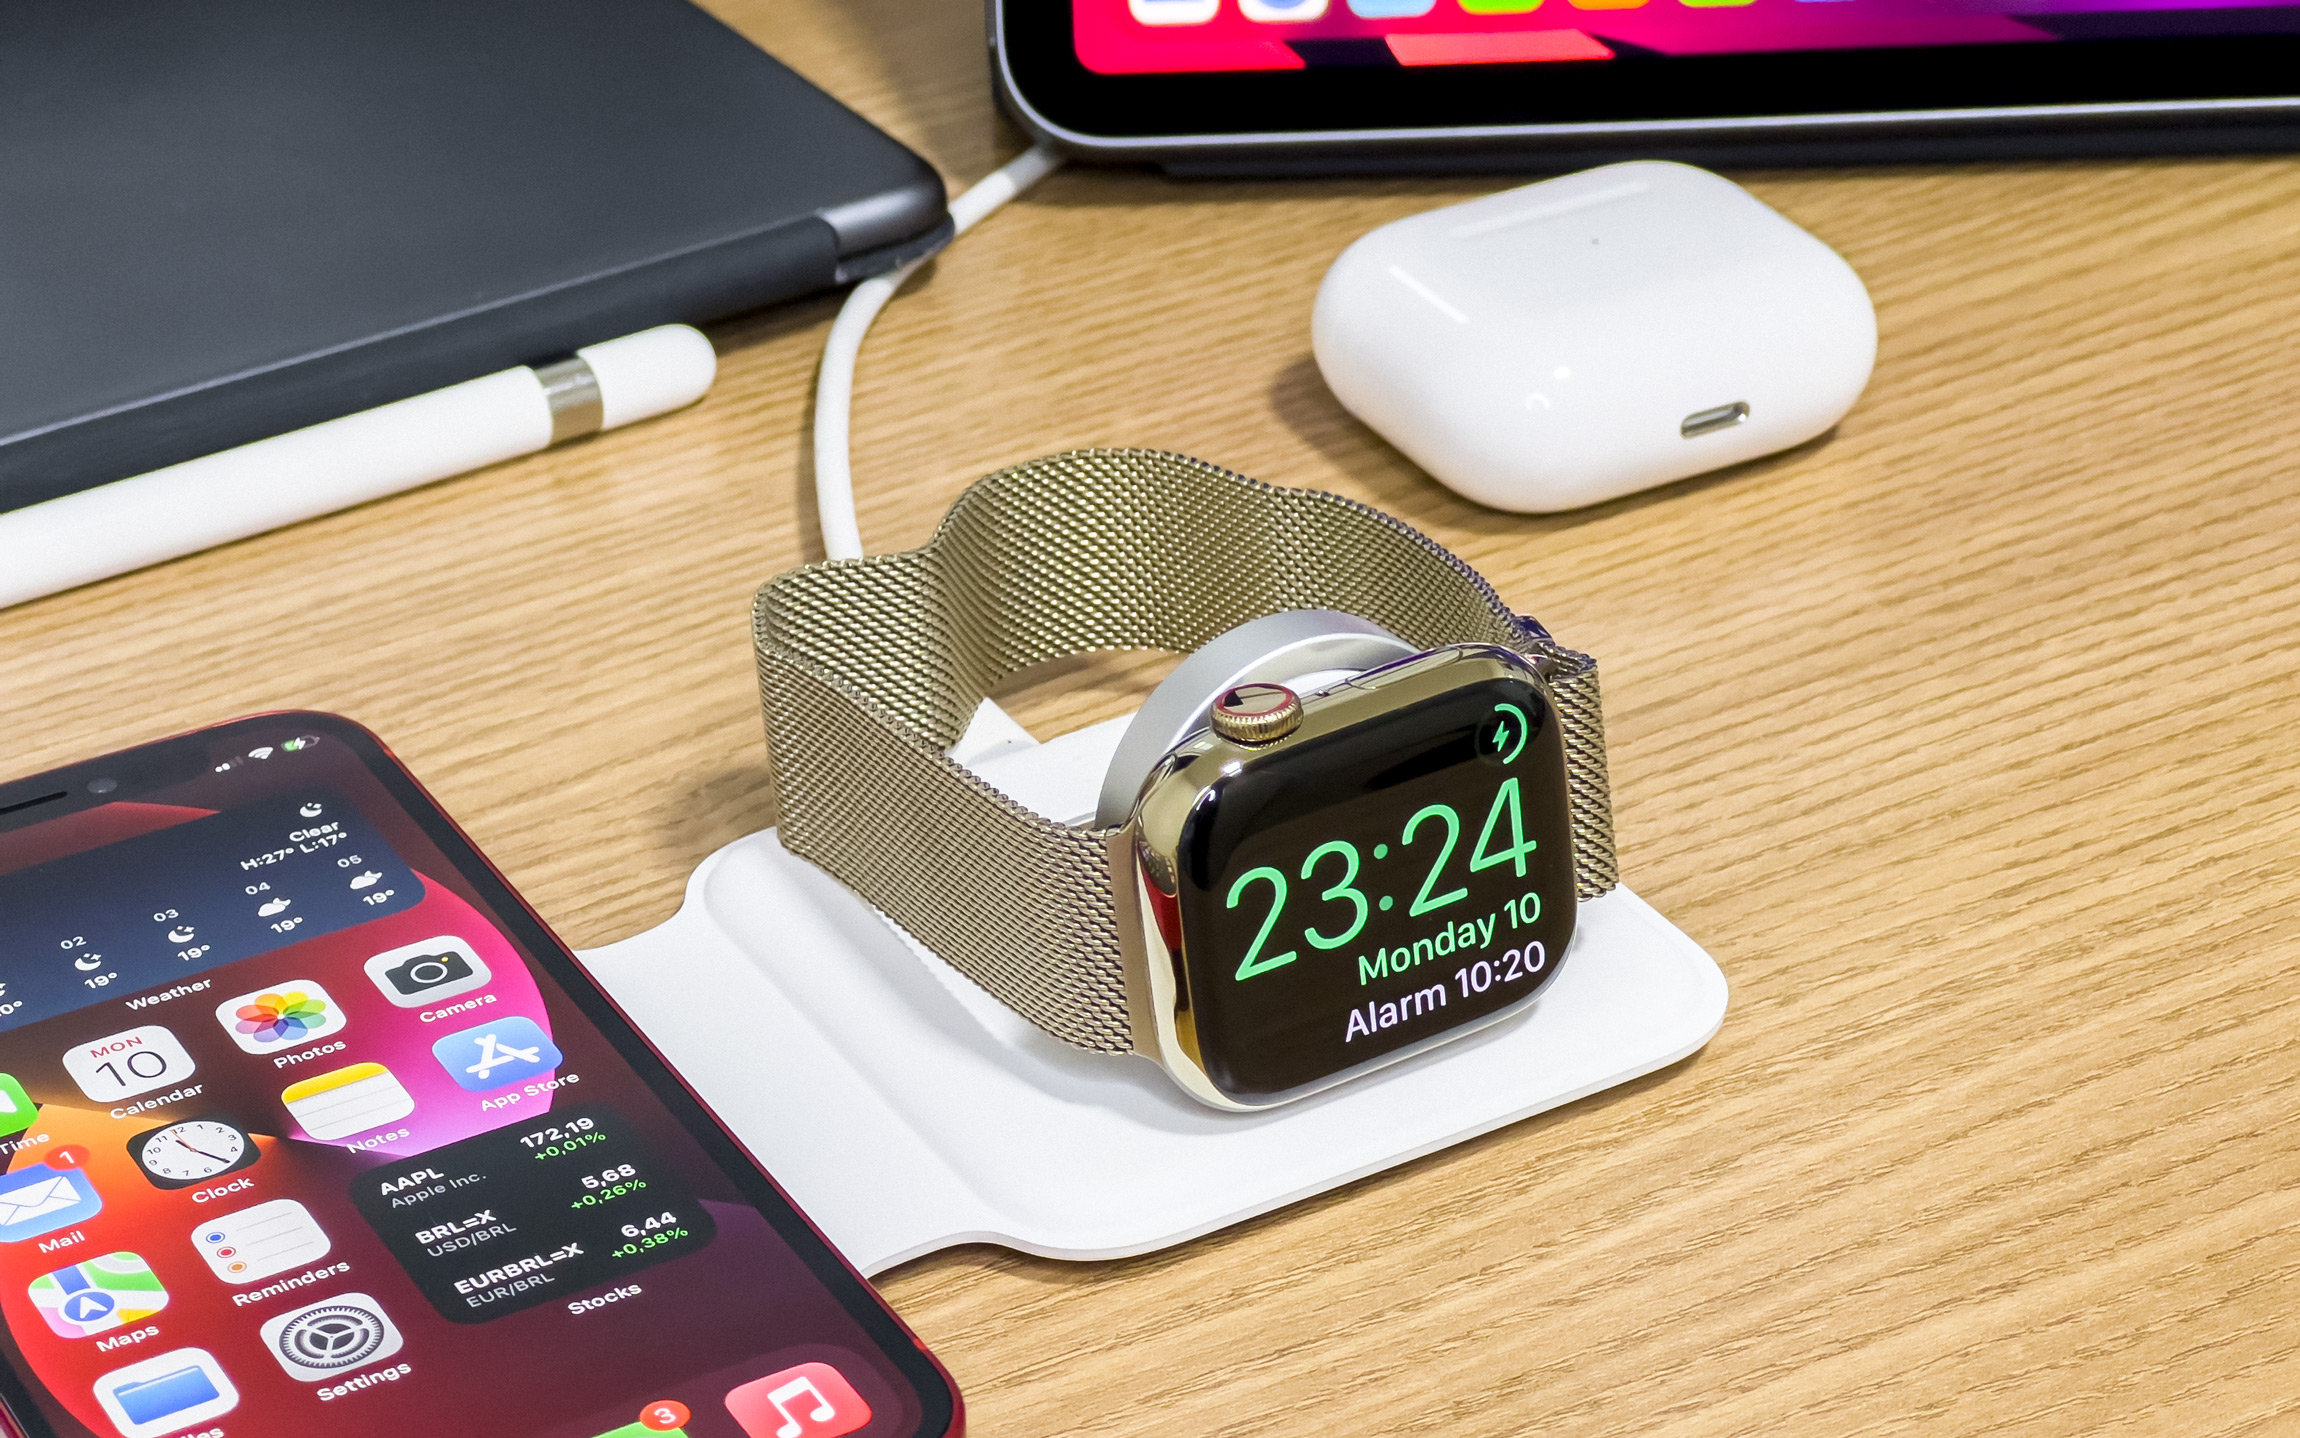 Feature request: Apple Watch should have a smart low power mode.